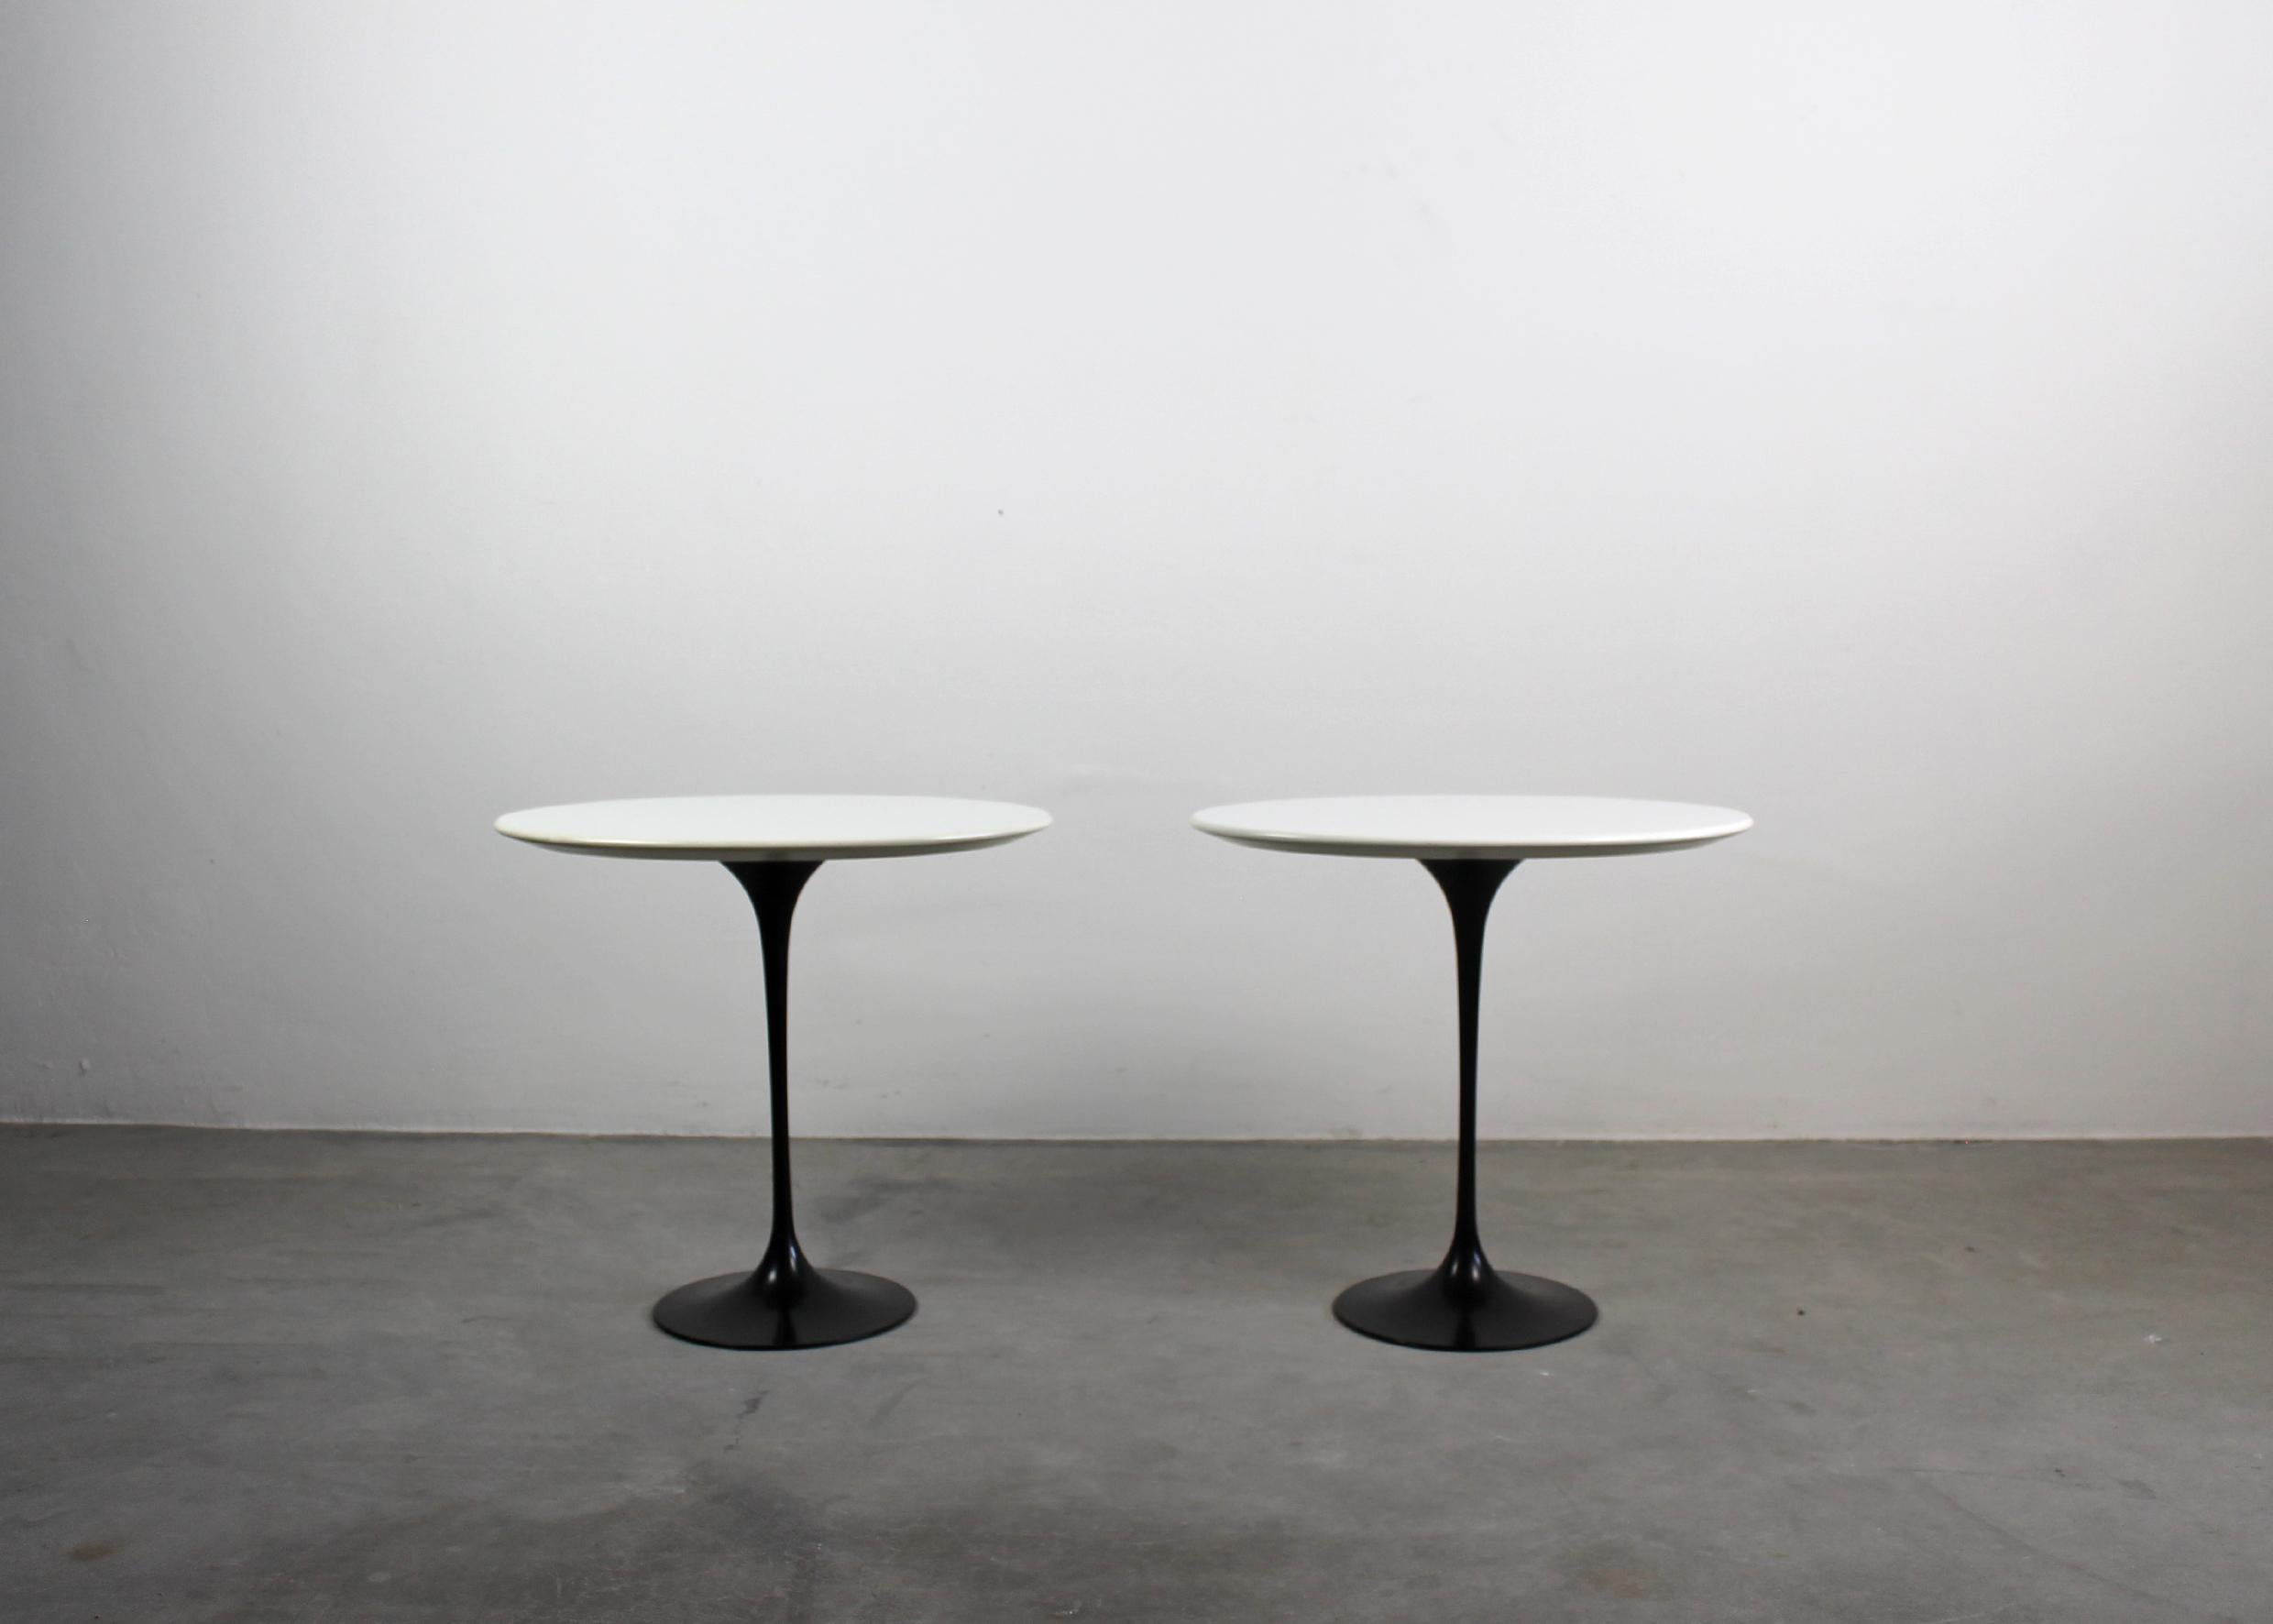 Set of two coffee tables with a black pedestal base in painted die-cast aluminum and an oval-shaped top in white lacquered wood.

These two tables were manufactured in the 1990s in the style of the designer Eero Saarinen

Eero Saarinen was a